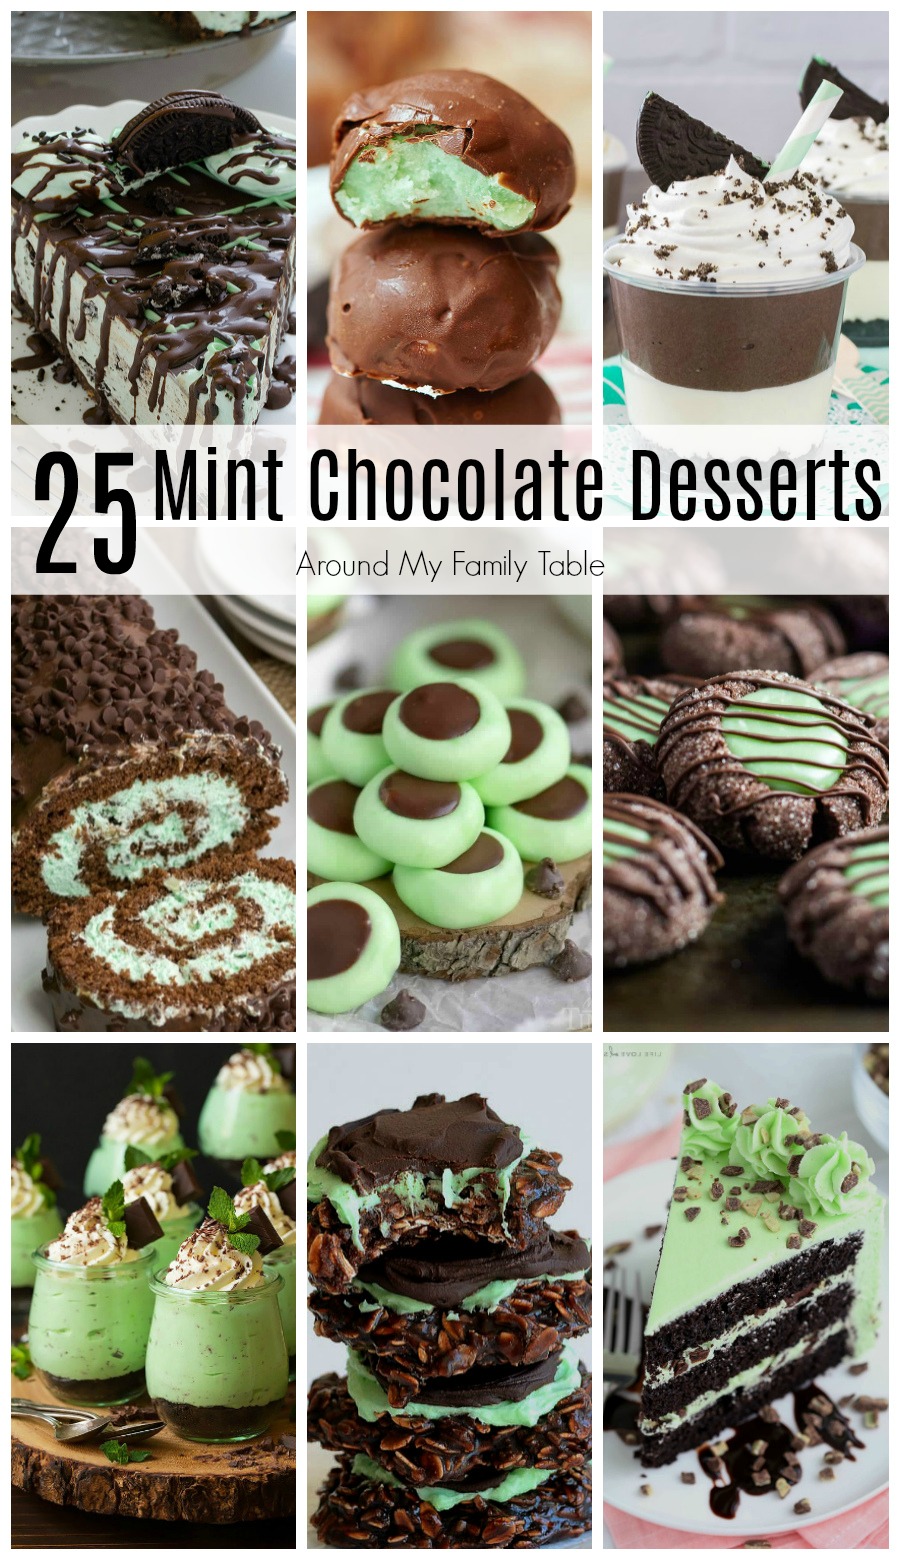 These 25 chocolate mint dessert recipes are sure to satisfy your sweet tooth.  Chocolate and Mint are a match made in dessert heaven! #chocolatemint #desserts #chocolatedesserts